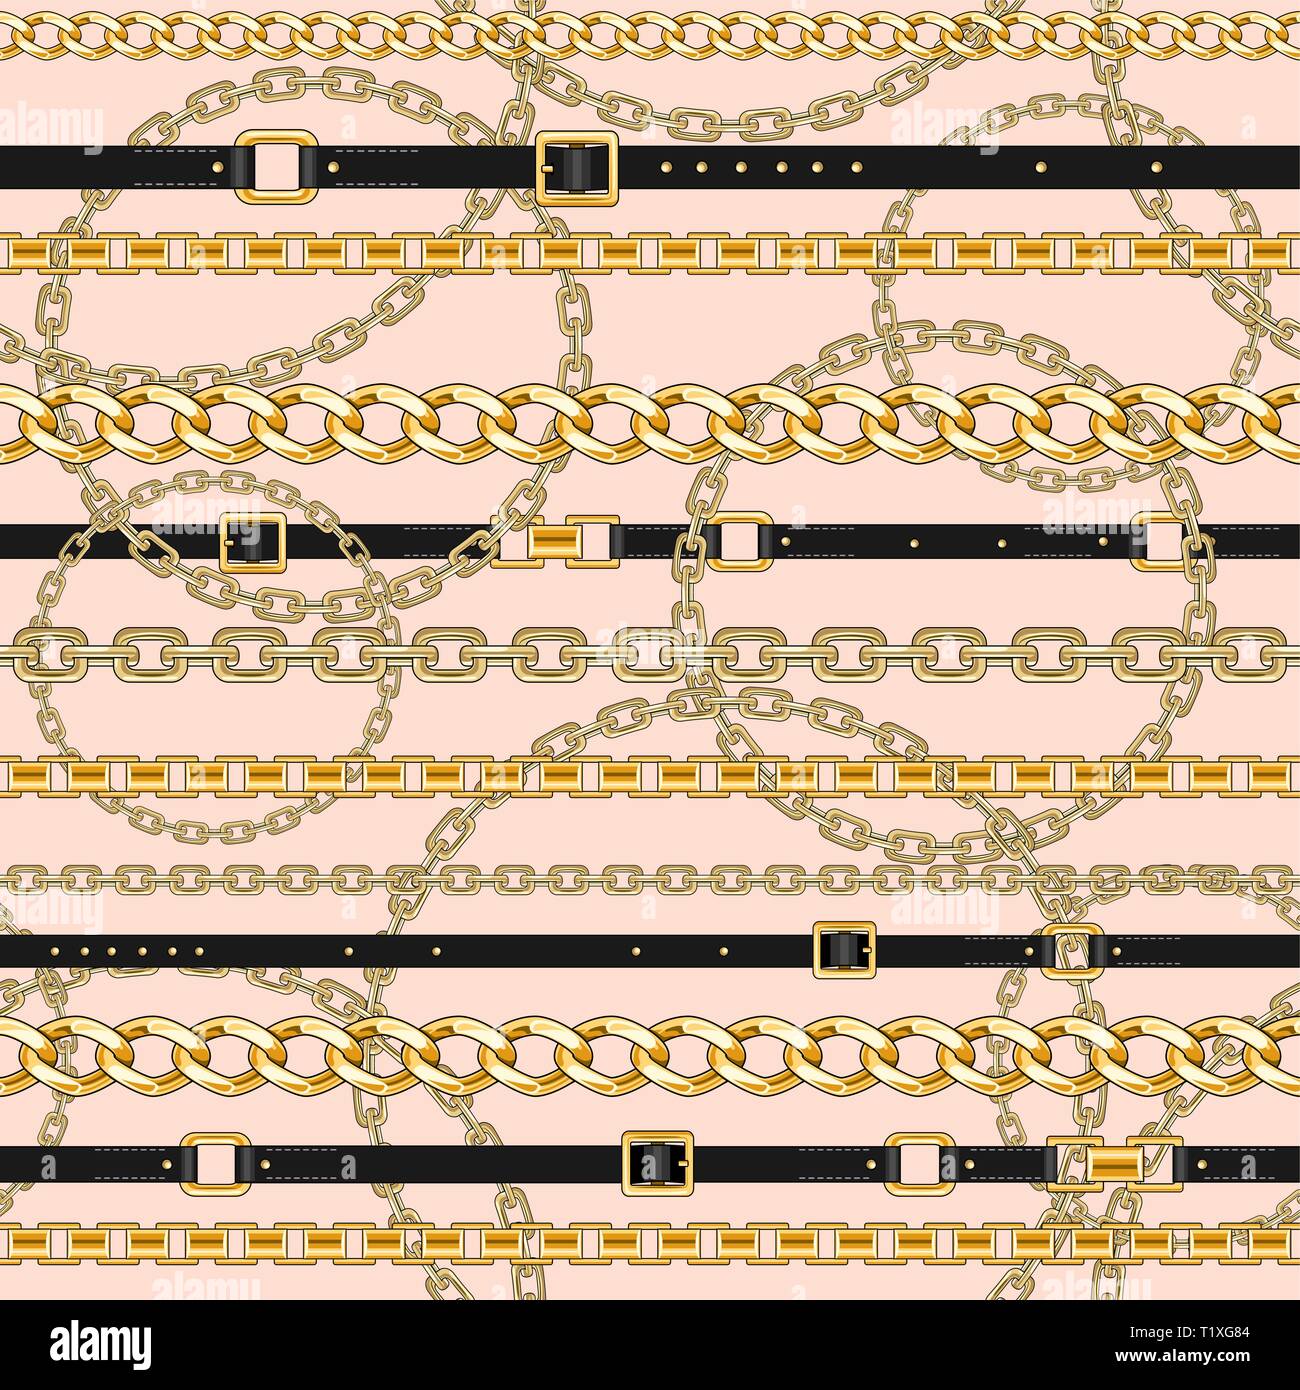 Seamless pattern with gold chains and belts on pink background for fabric. Trendy repeating print. Stock Vector